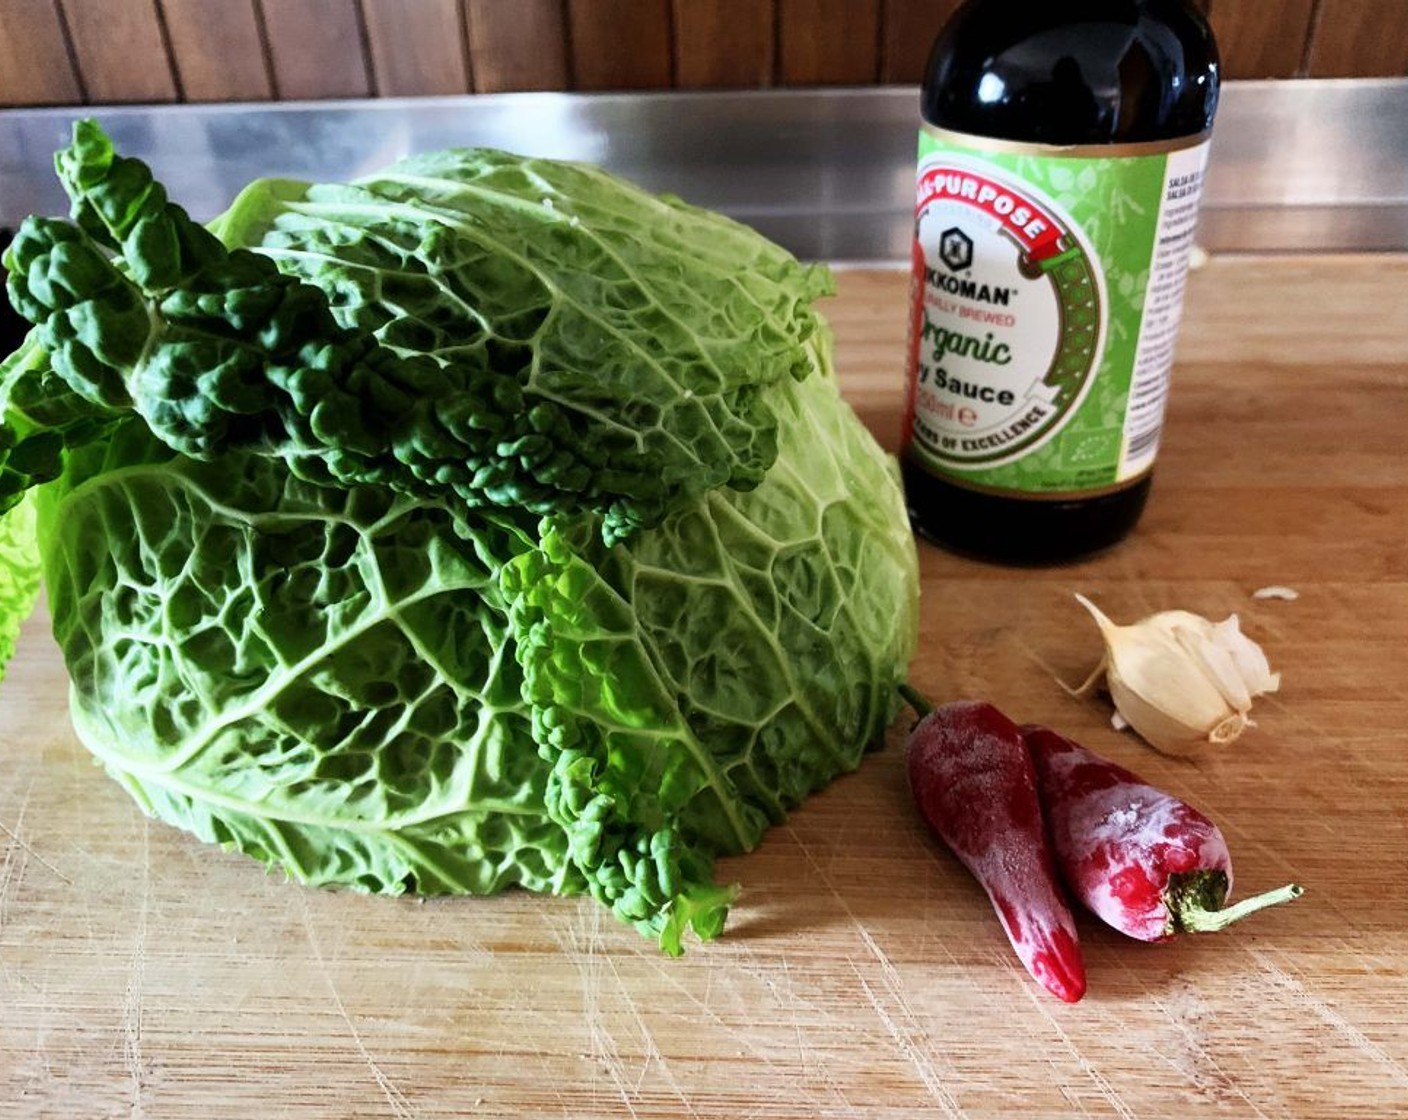 step 1 Wash and chop up the Green Cabbage (14 oz).